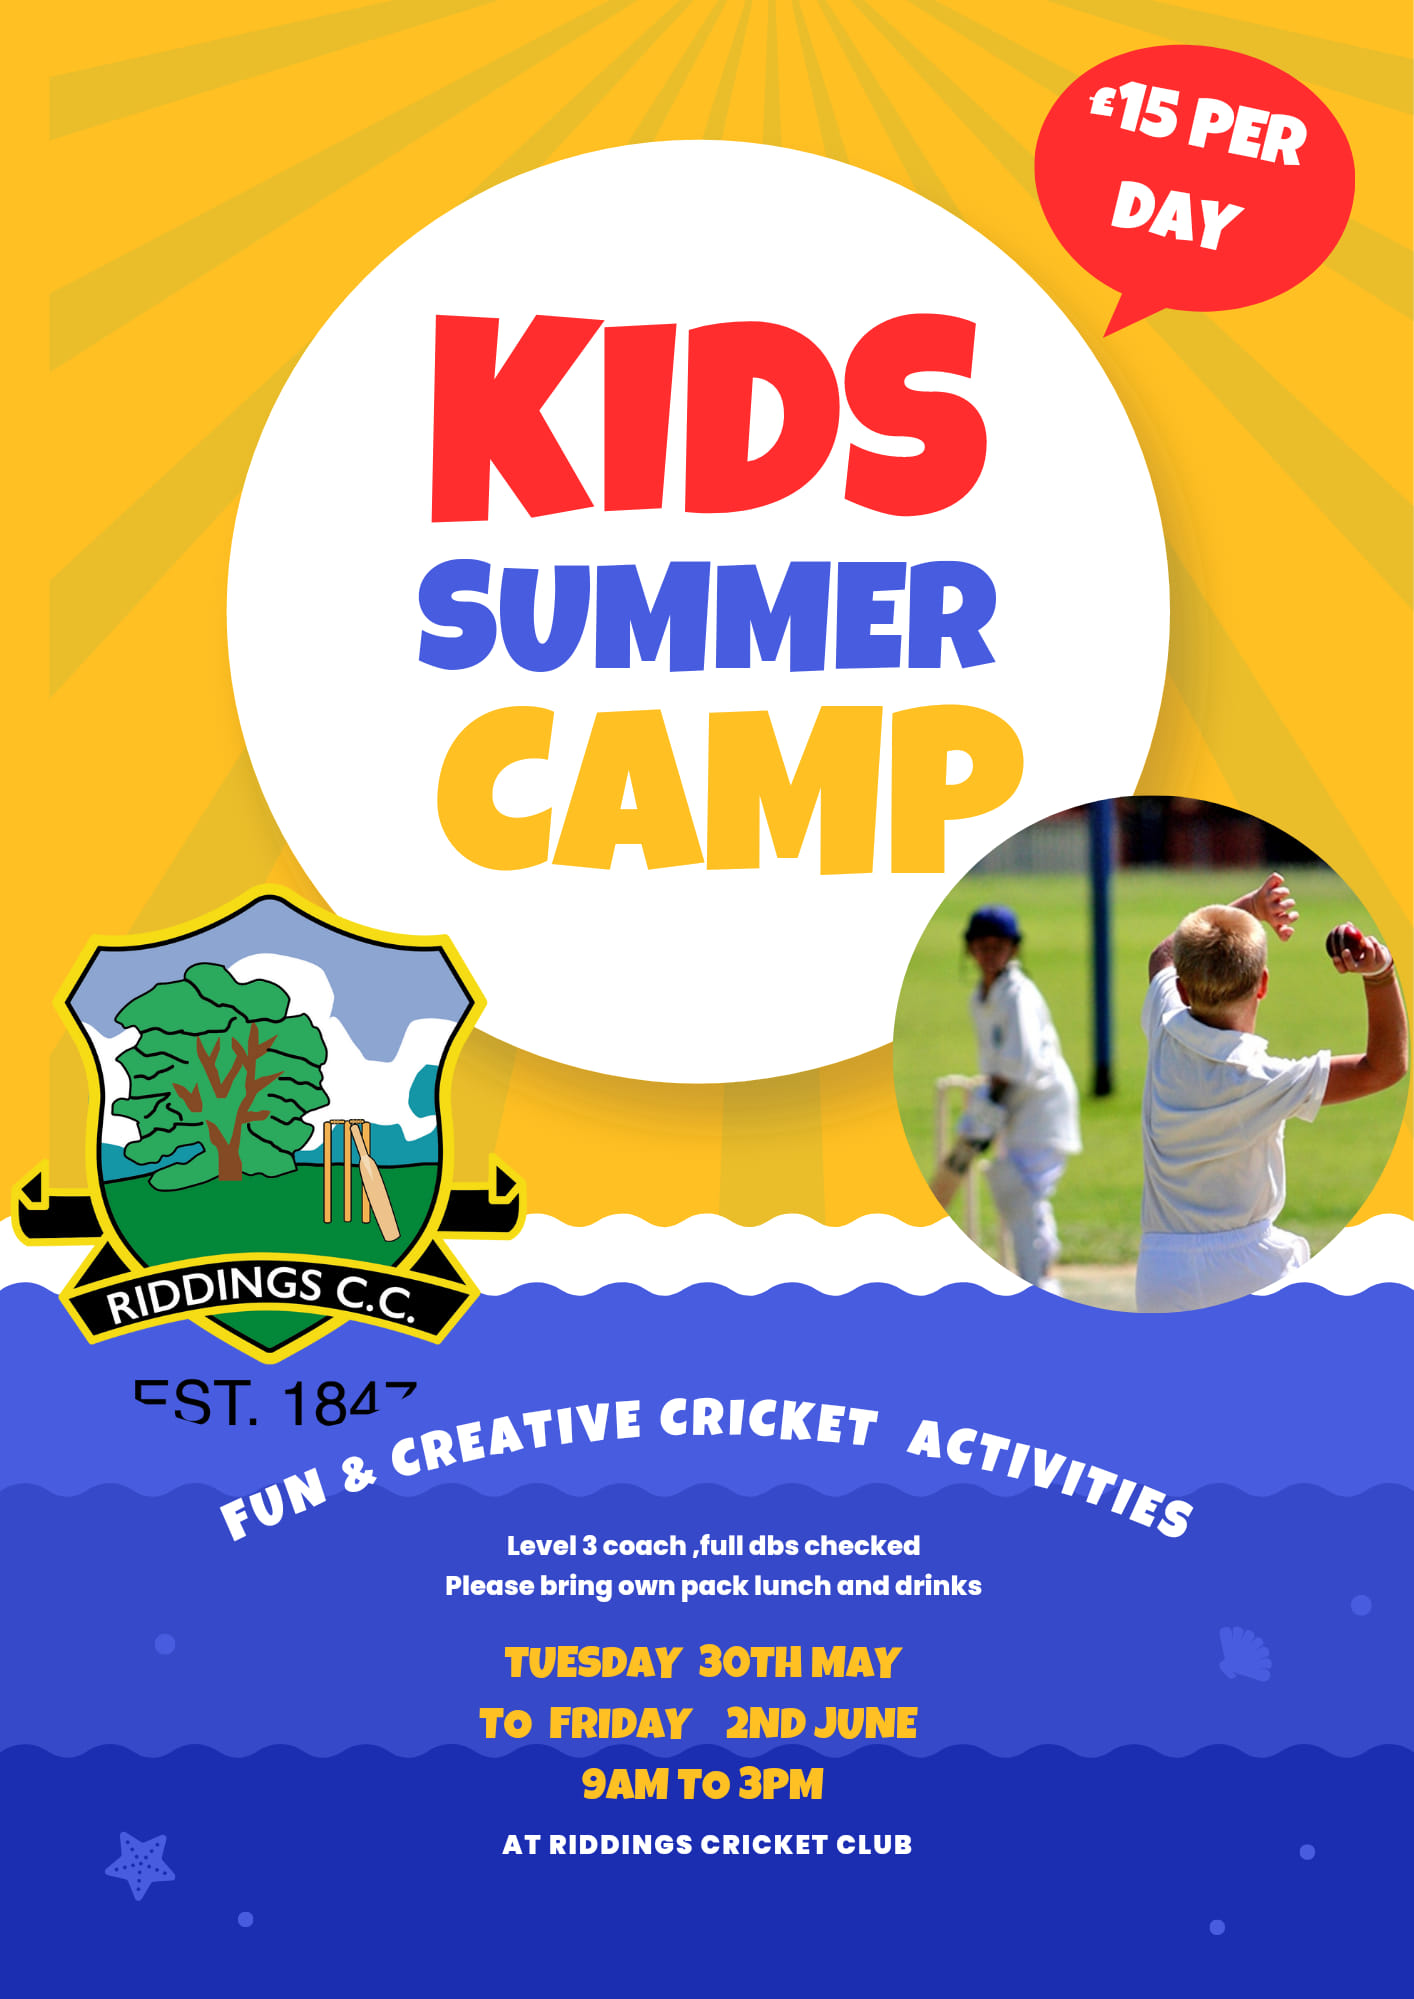 Riddings Cricket Club will host a holiday camp during the May half term